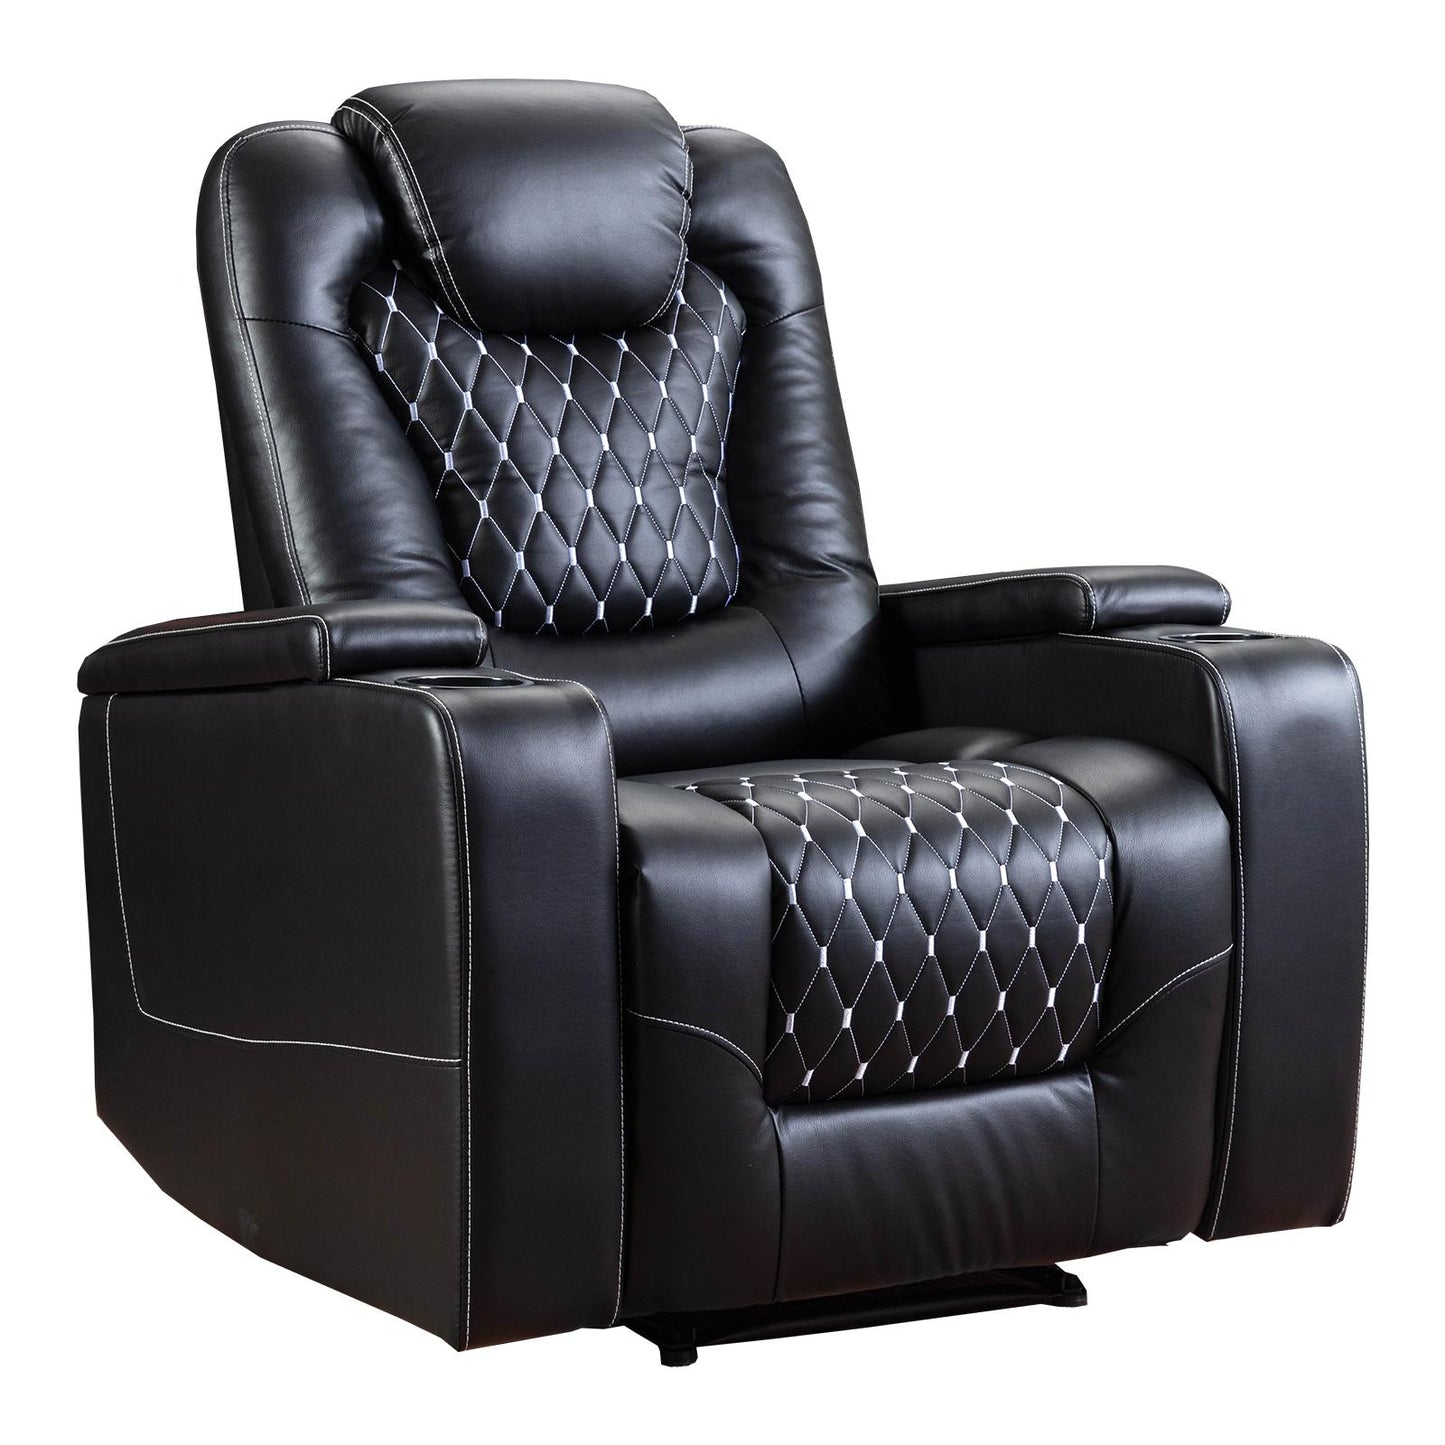 Power Recliner Chair with USB Ports and Cup Holders